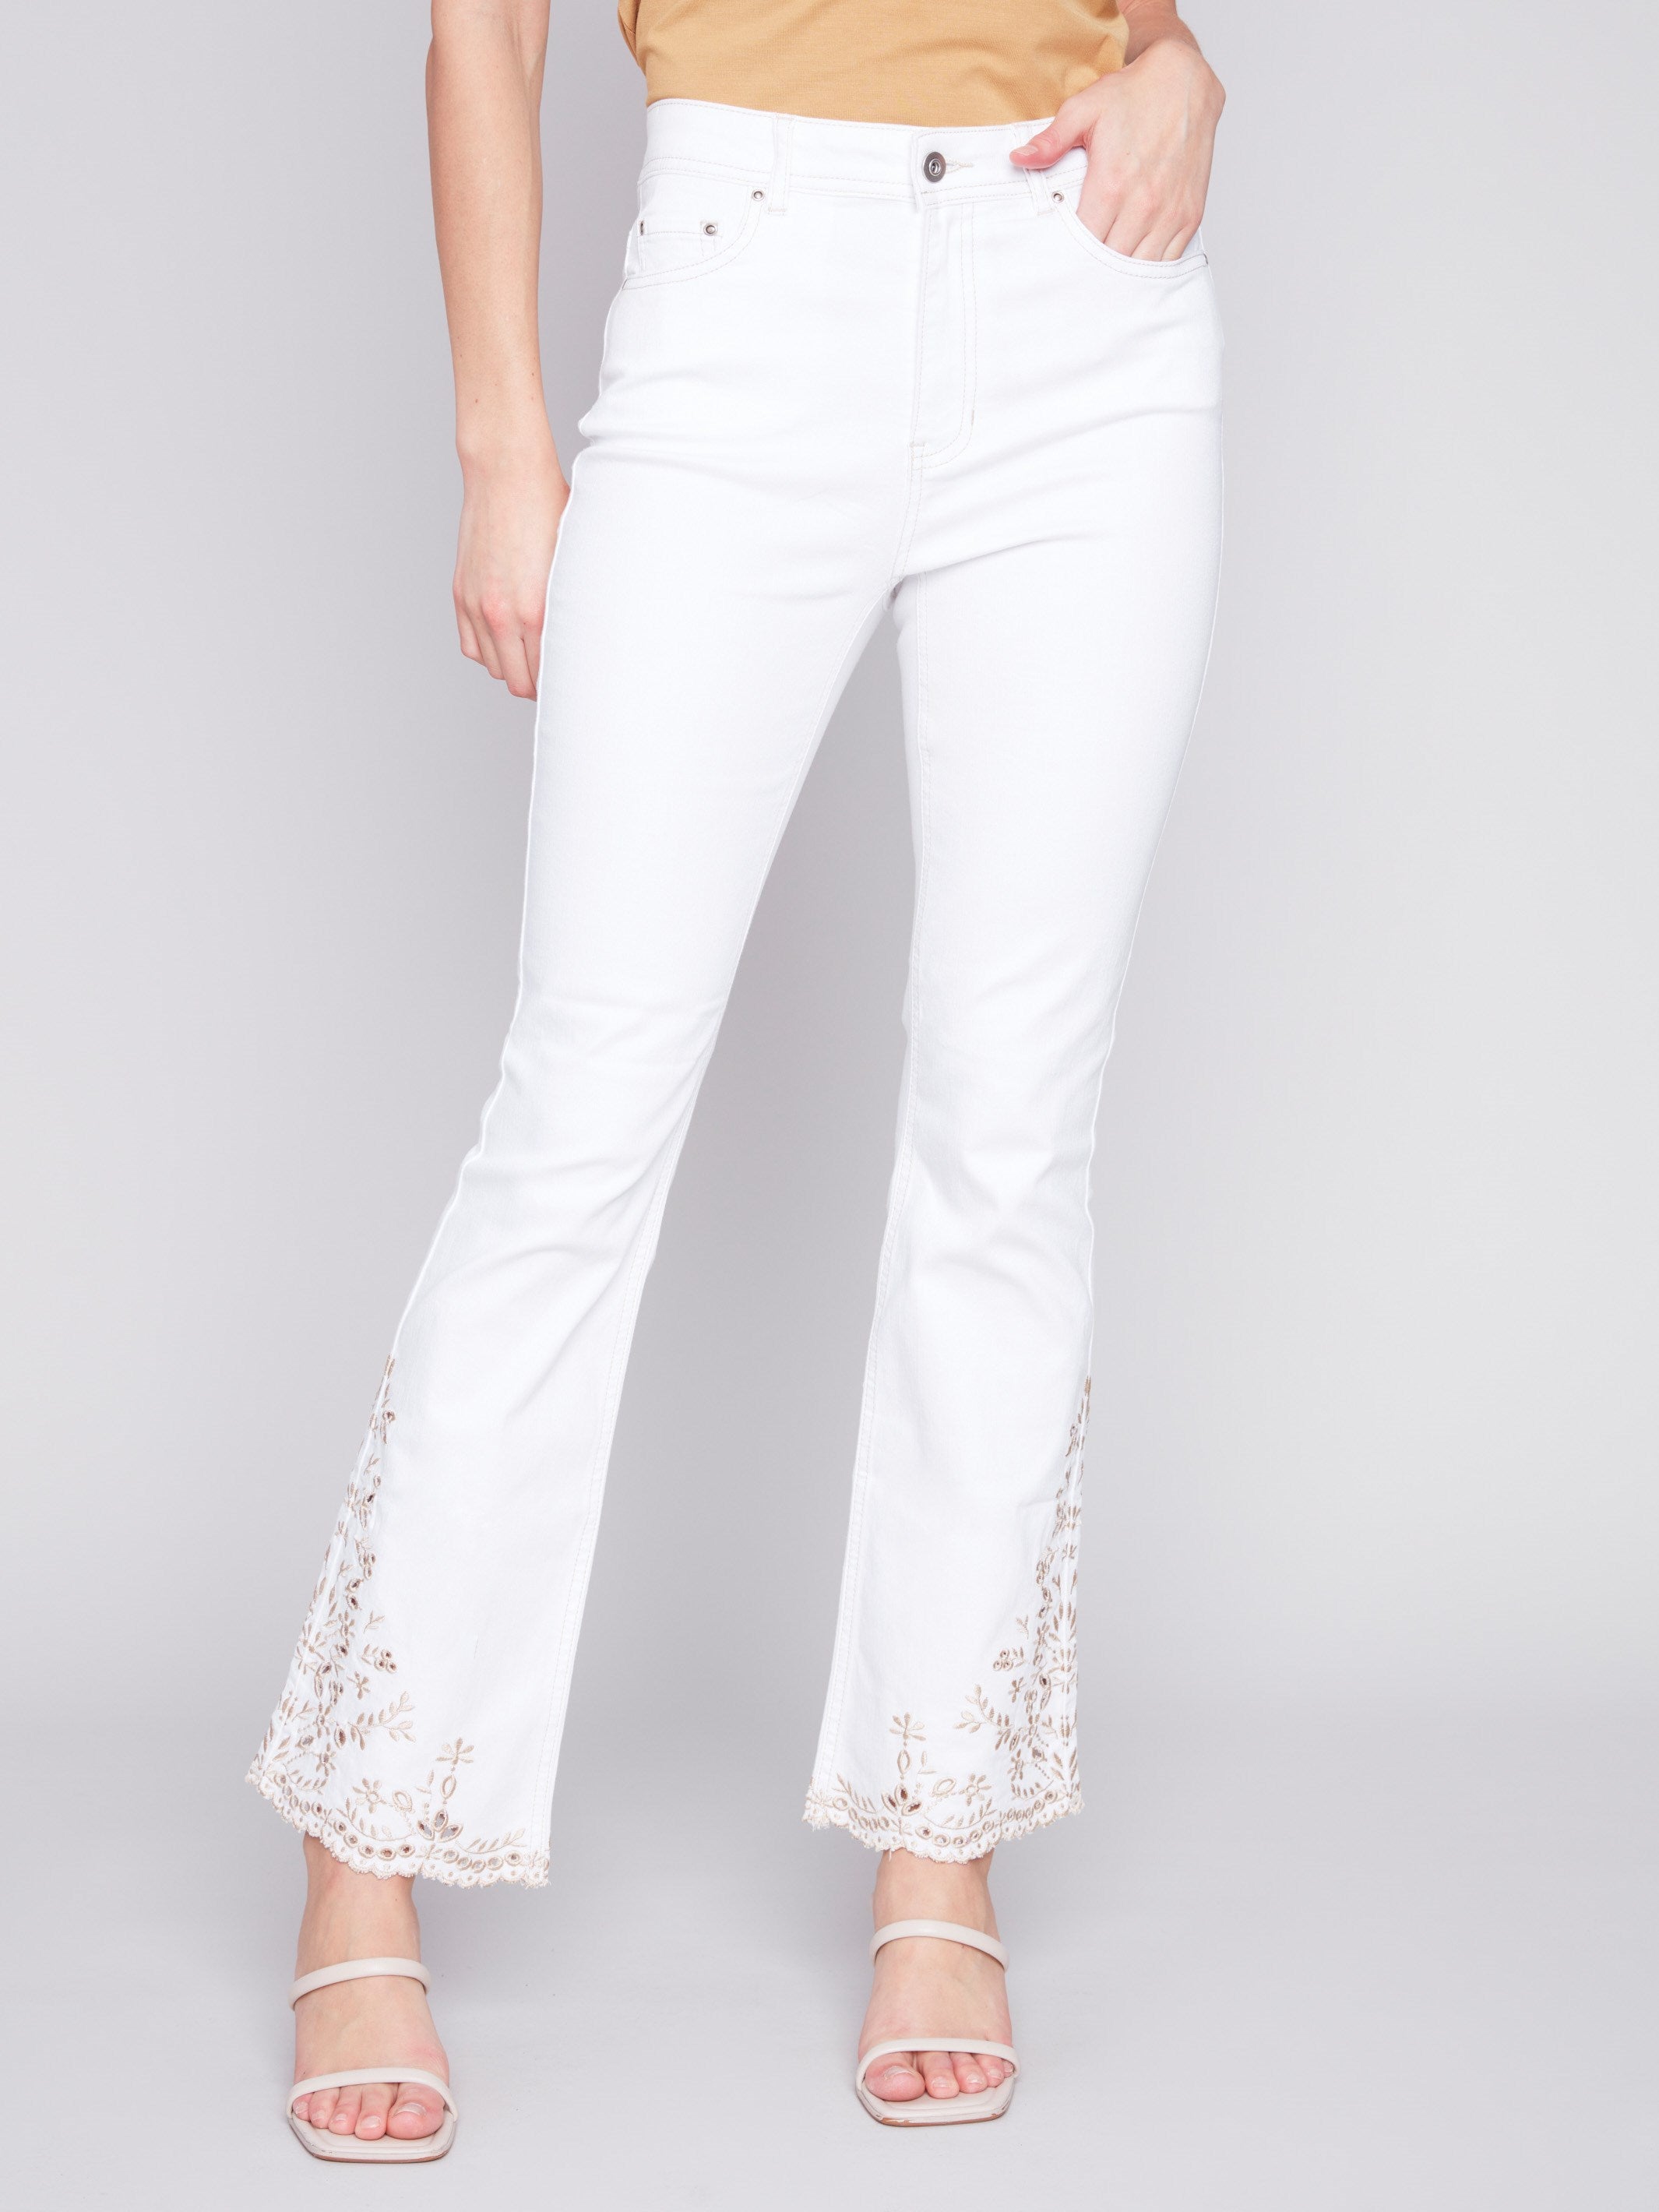 Bootcut Twill Jeans with Embroidery - White - Charlie B Collection Canada - Image 2